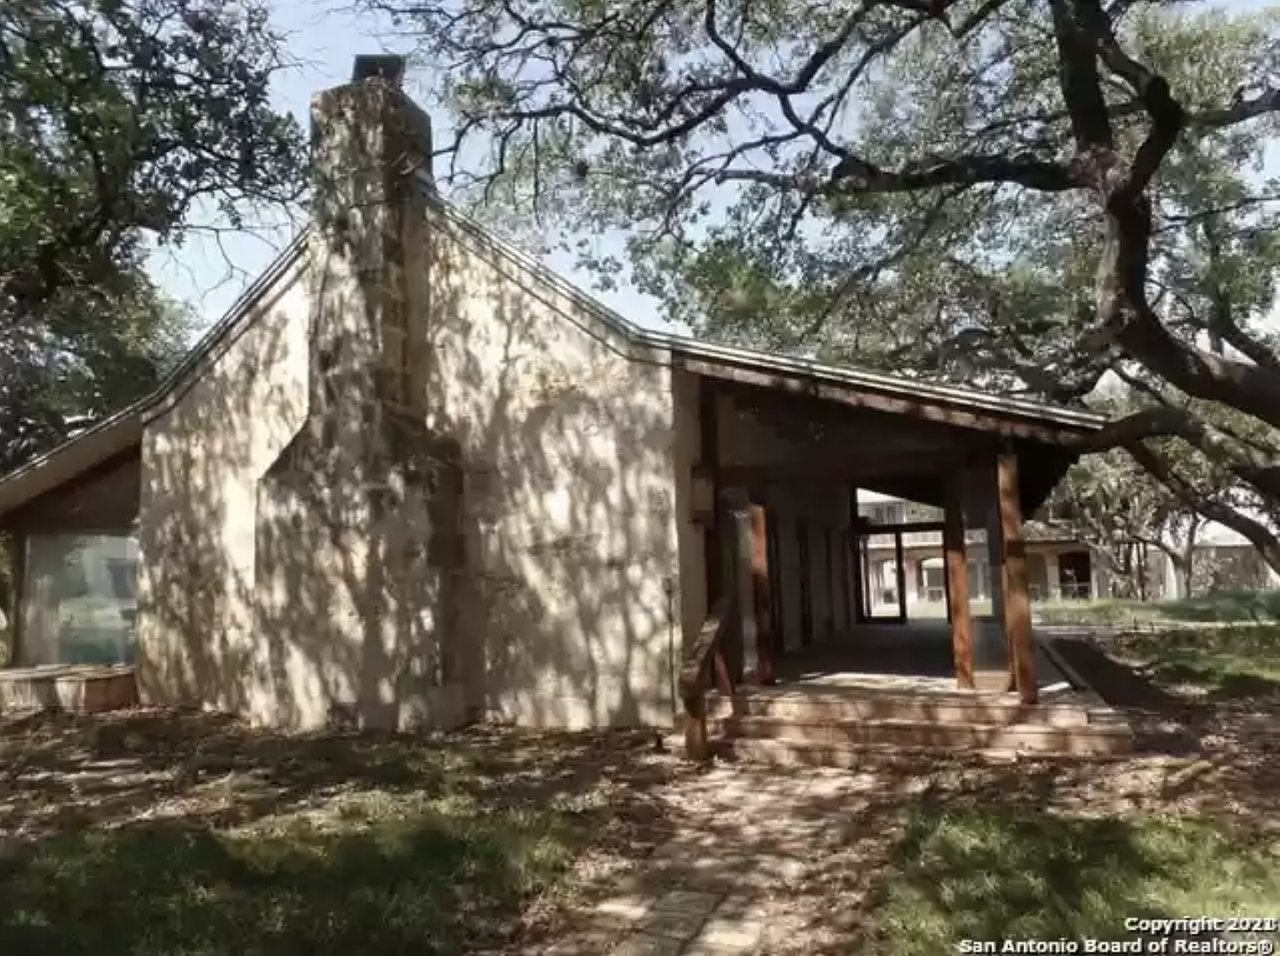 A San Antonio home designed by architect O'Neil Ford for the Fox Photo family is now for sale